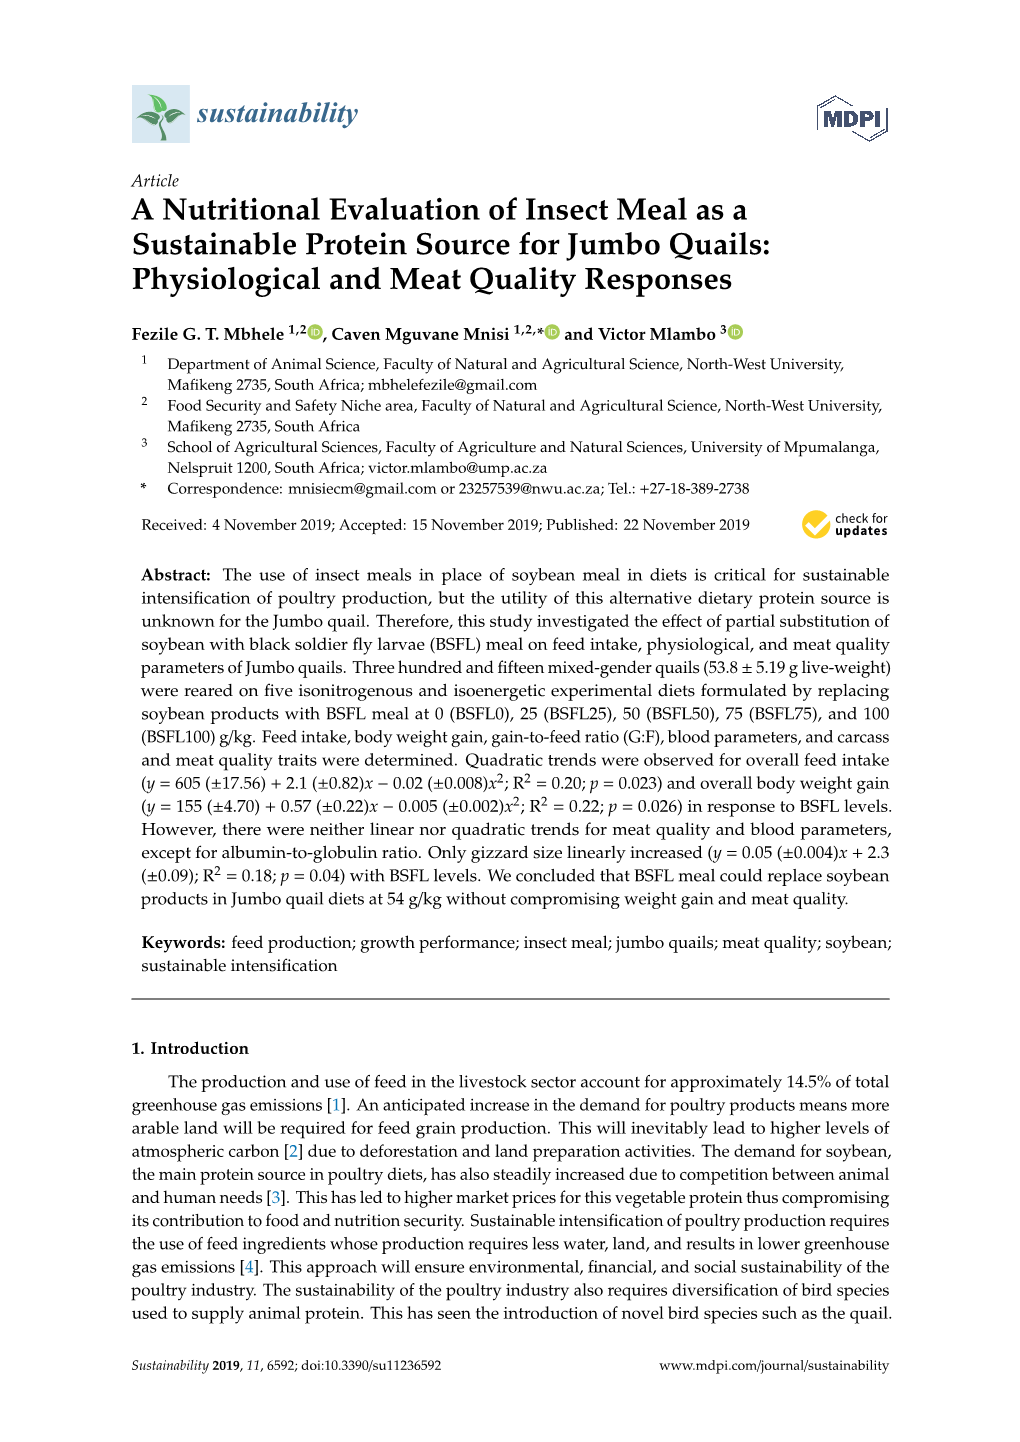 A Nutritional Evaluation of Insect Meal As a Sustainable Protein Source for Jumbo Quails: Physiological and Meat Quality Responses